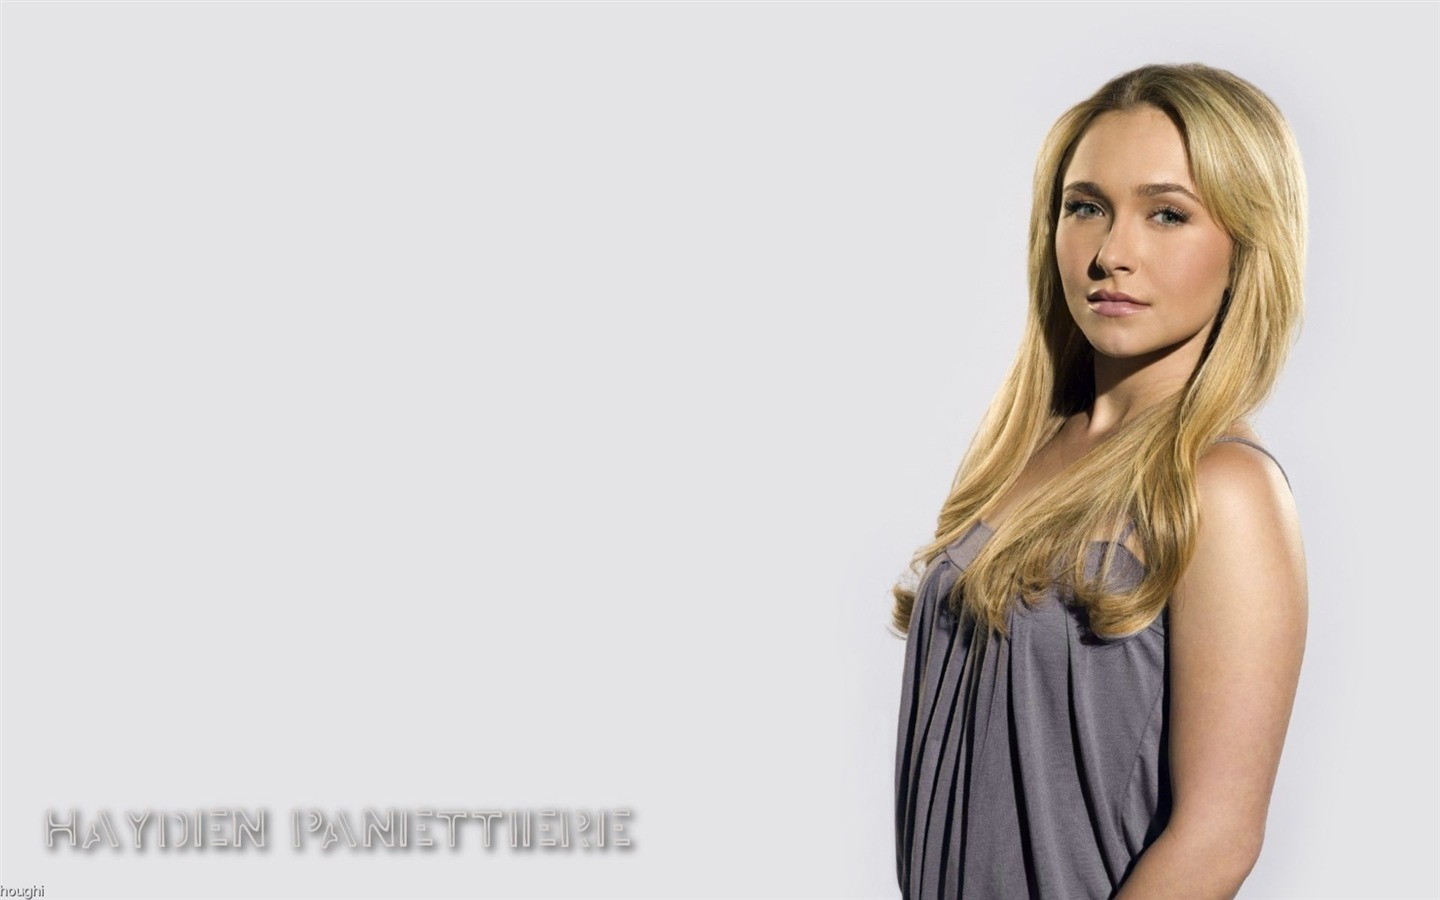 Hayden Panettiere #004 - 1440x900 Wallpapers Pictures Photos Images